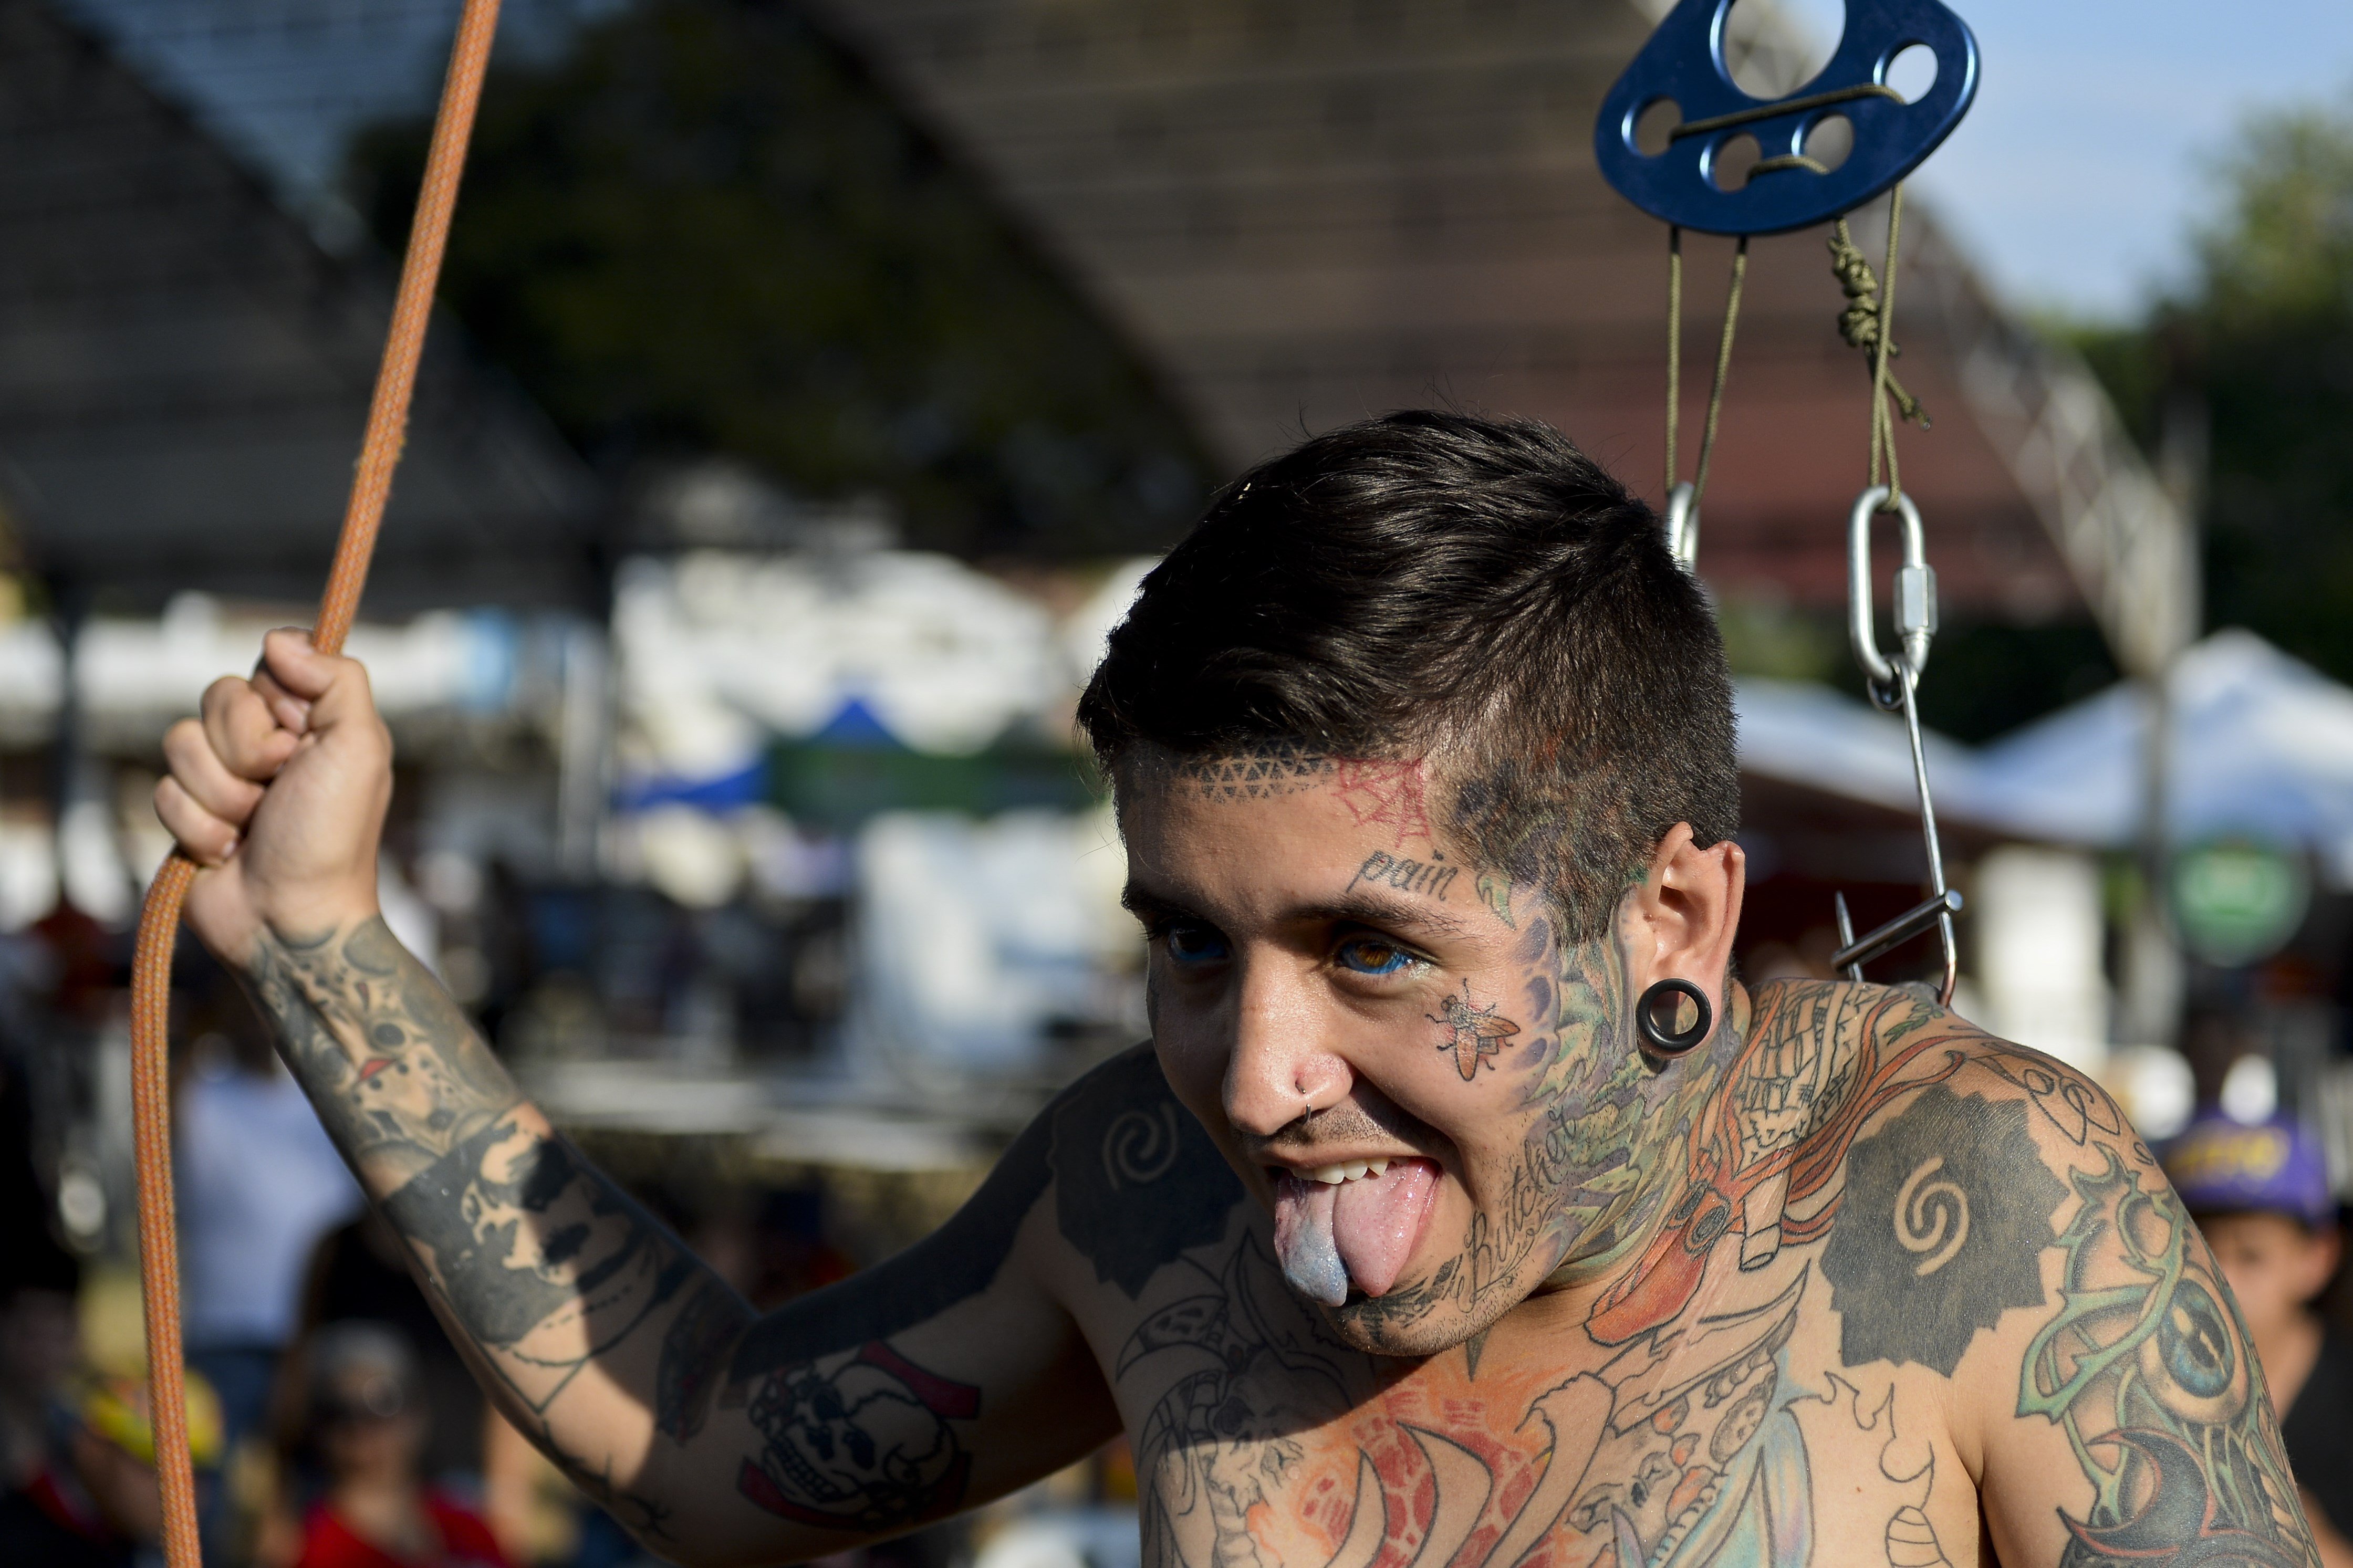 ReCapping The Elm Street Music and Tattoo Festival  Tattoodo